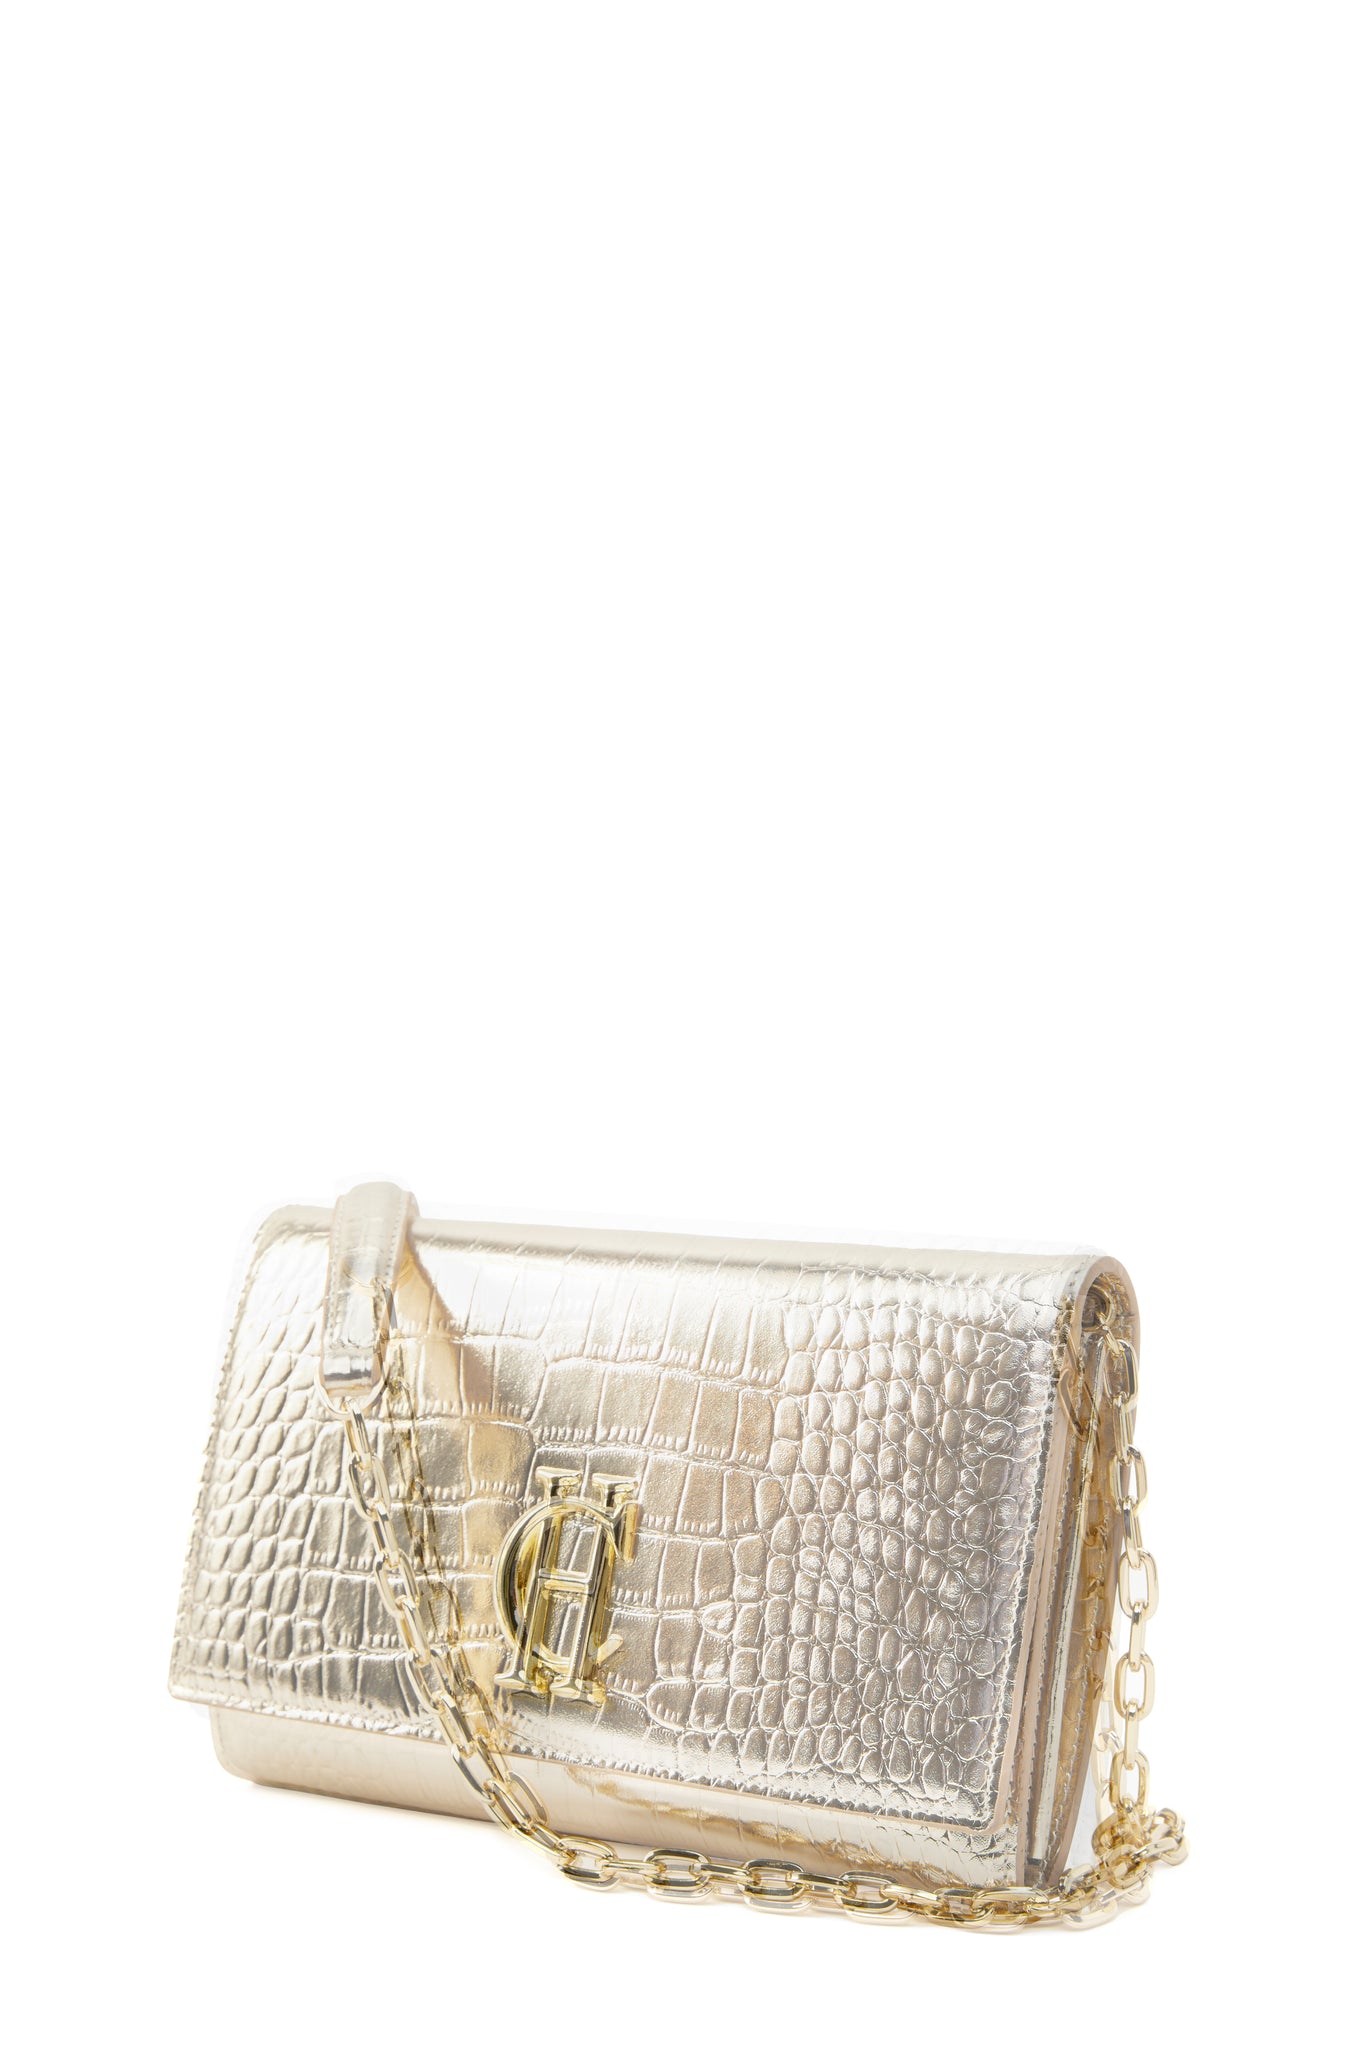 side shot womens white croc embossed leather clutch bag with gold hardware